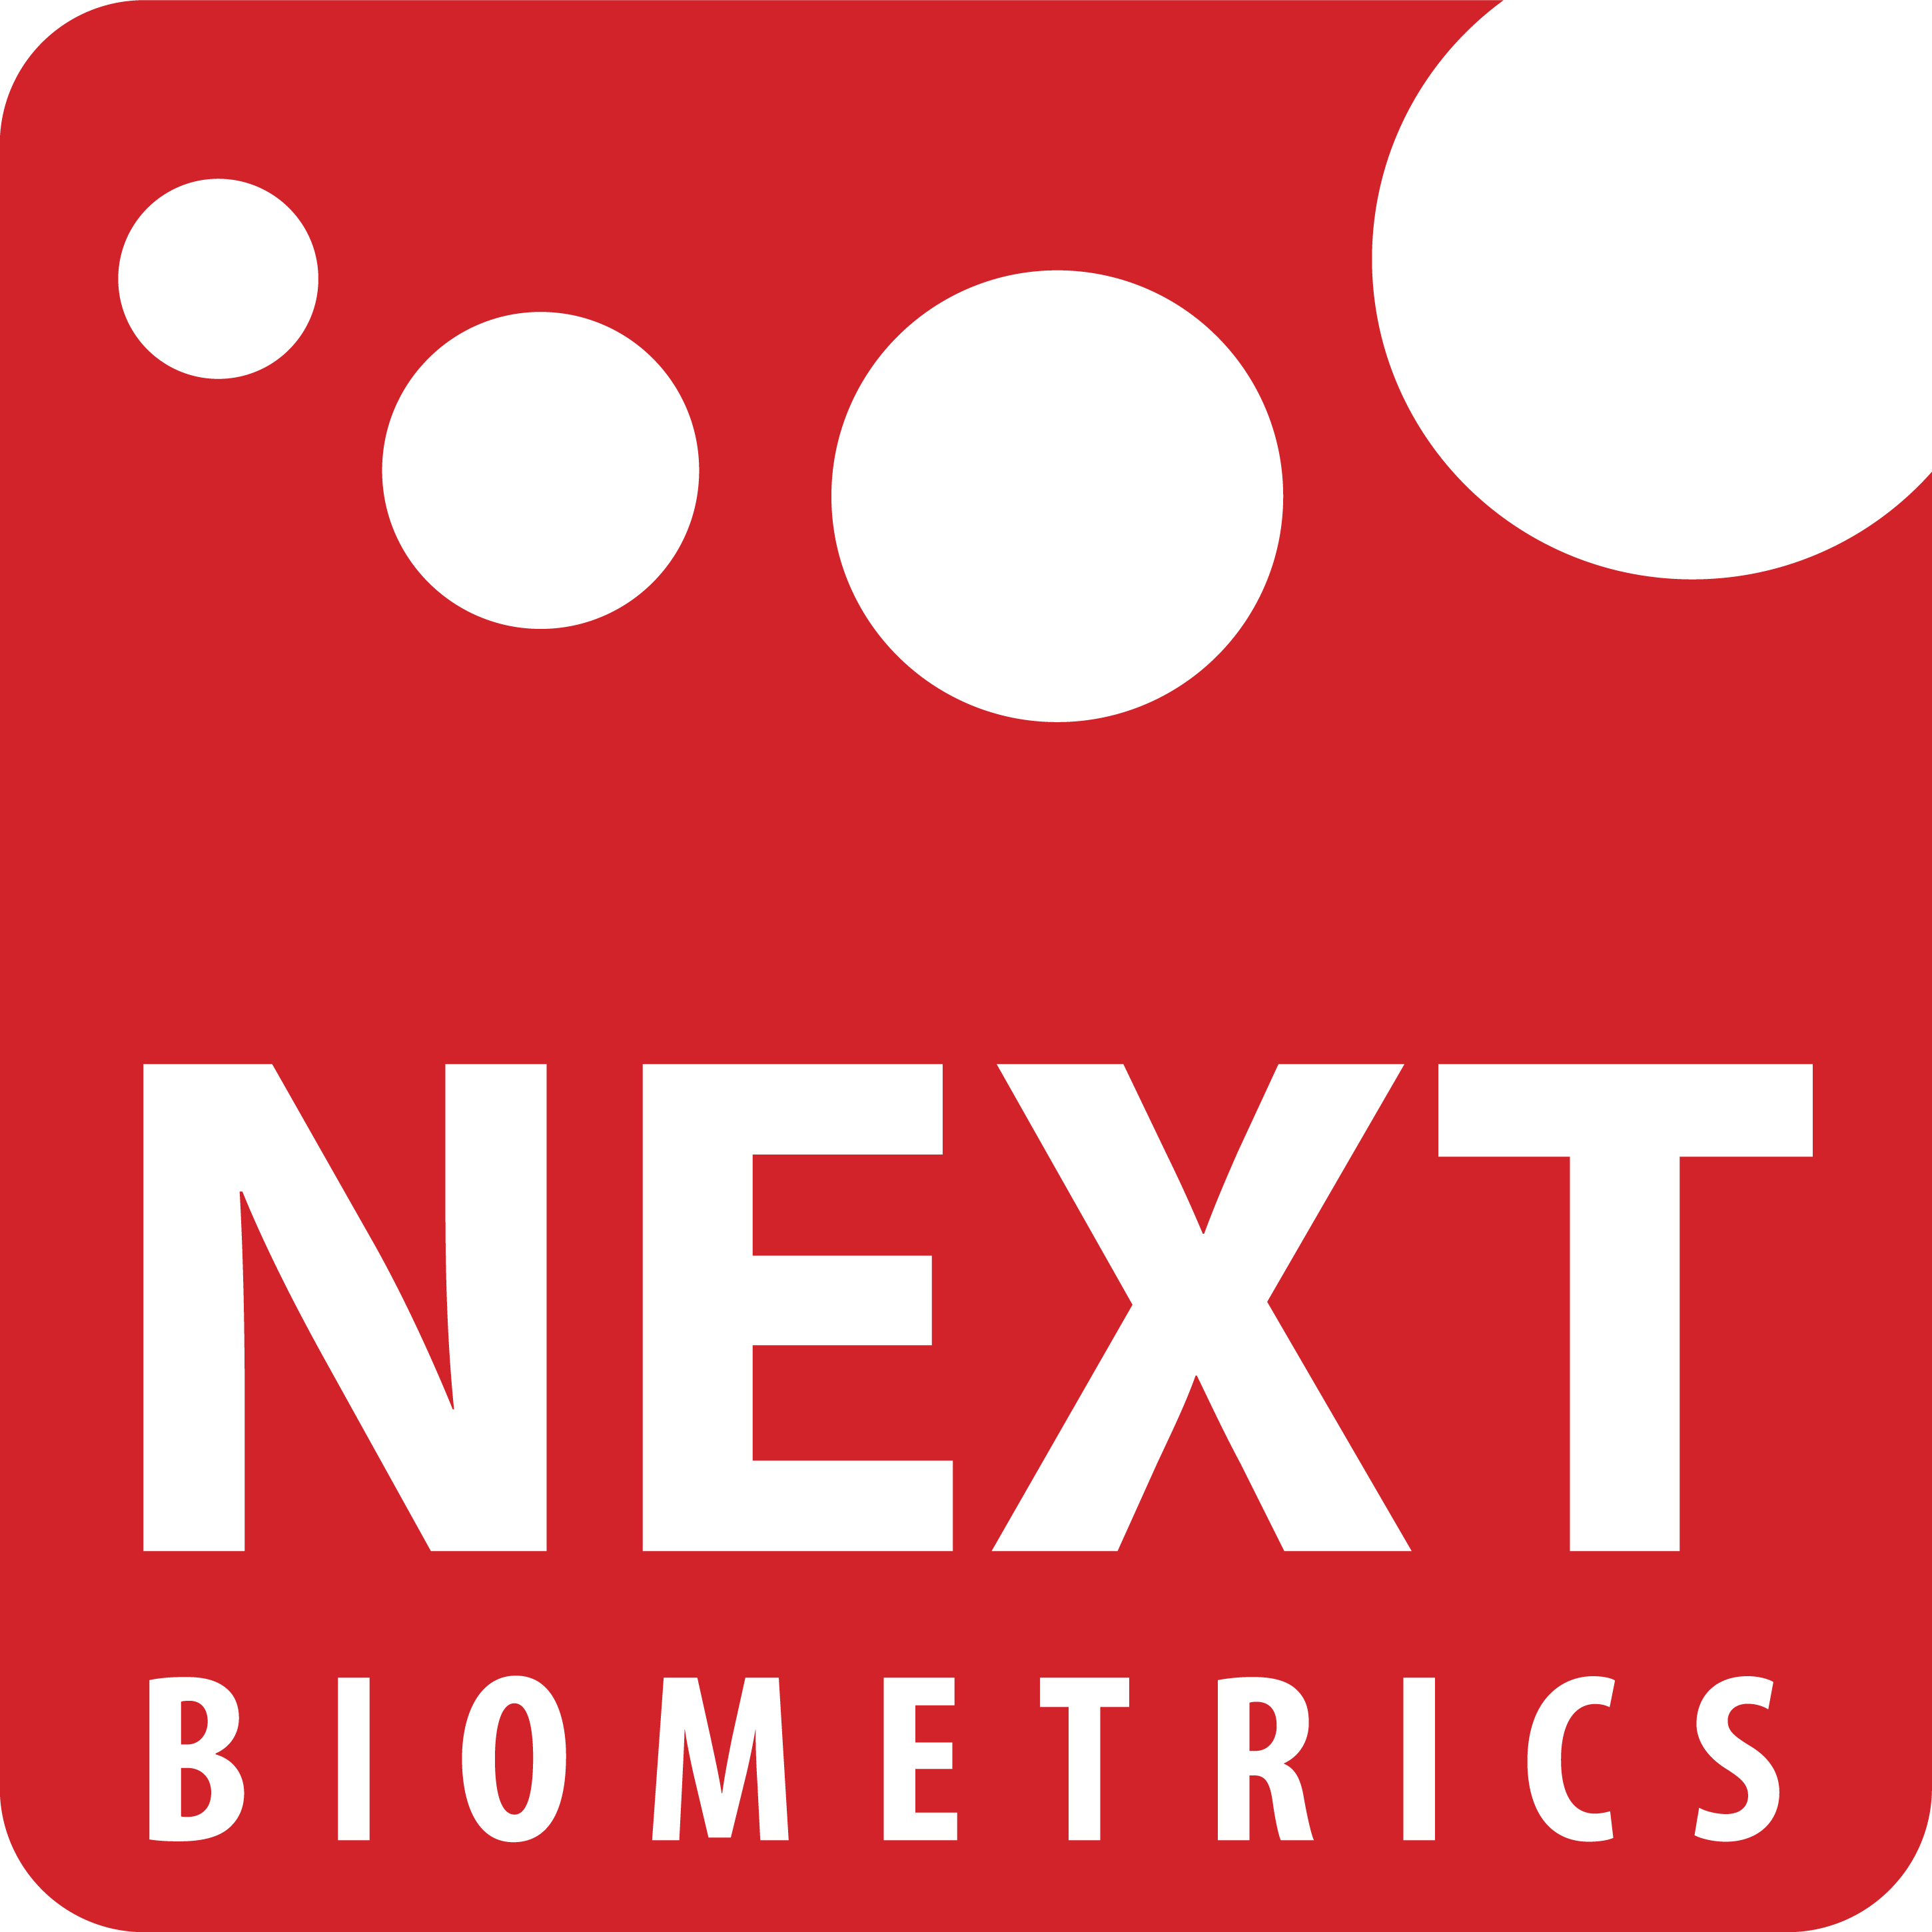 NEXT Biometrics offers high quality fingerprint sensors at a fraction of prices of comparable competitors.  NEXT is headquartered in Oslo, Norway.